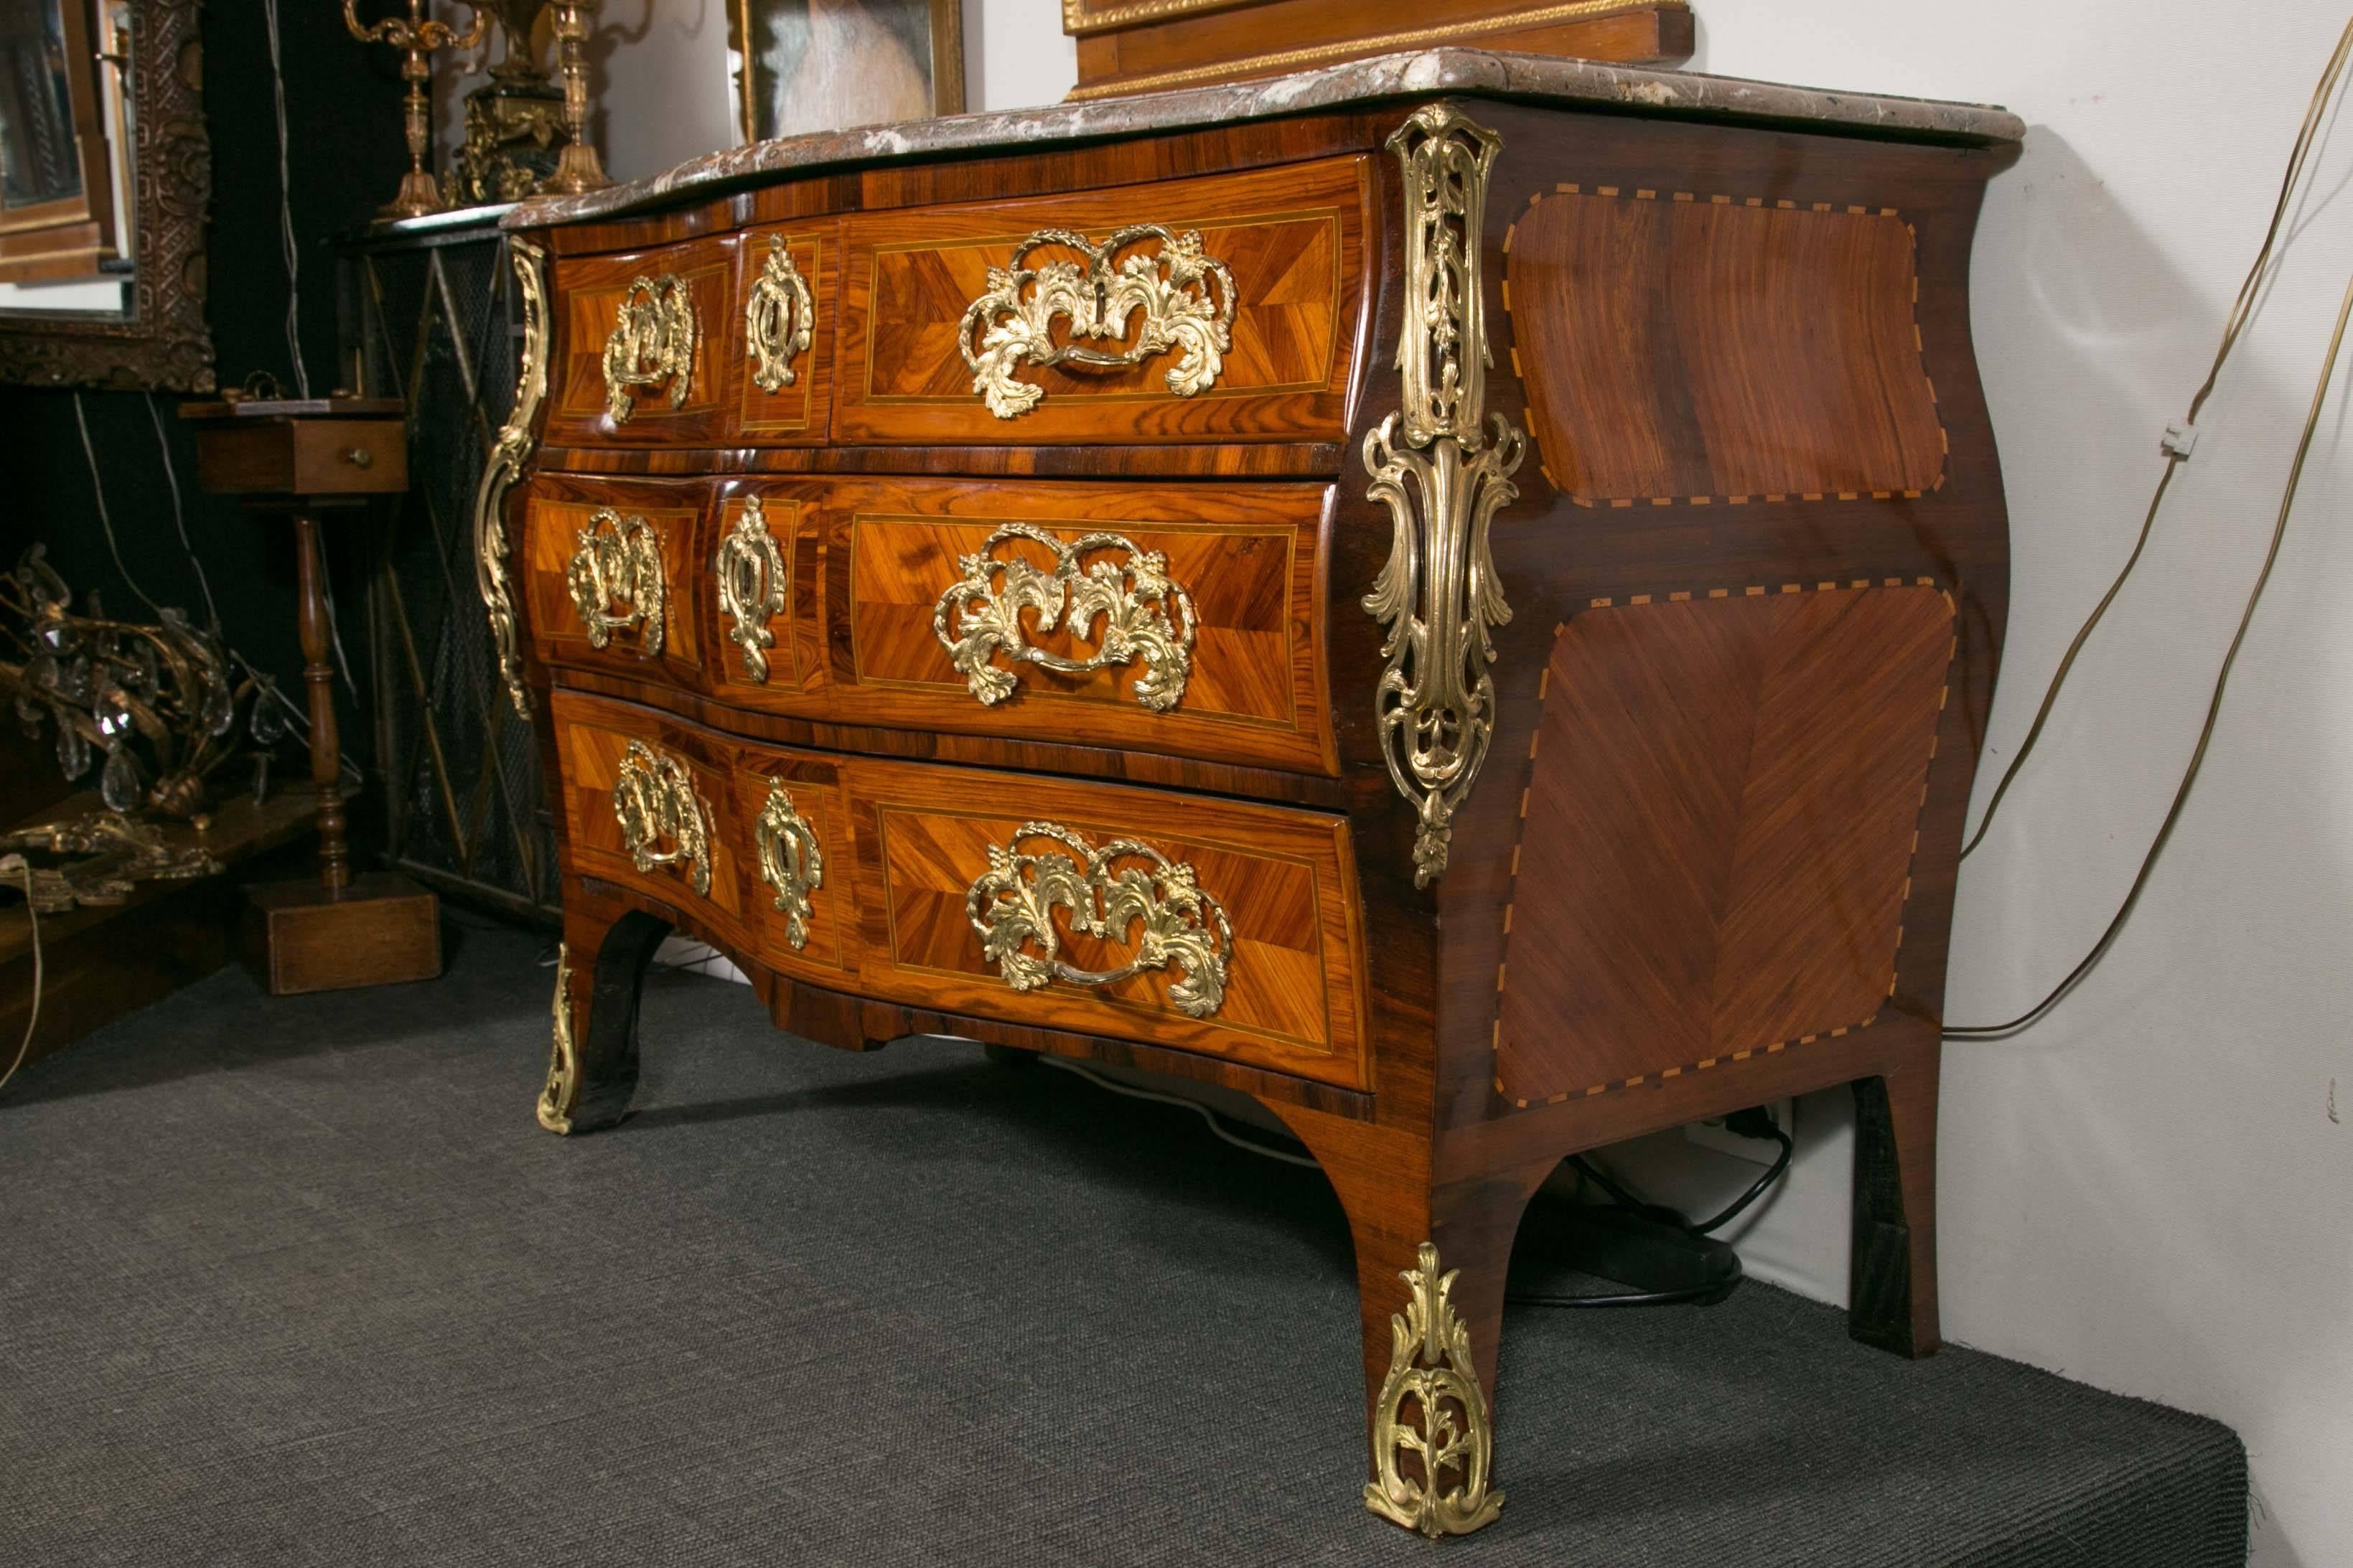 Louis XV Elegant 18th Century Commode in Marquetry and Rare Inlaid Woods